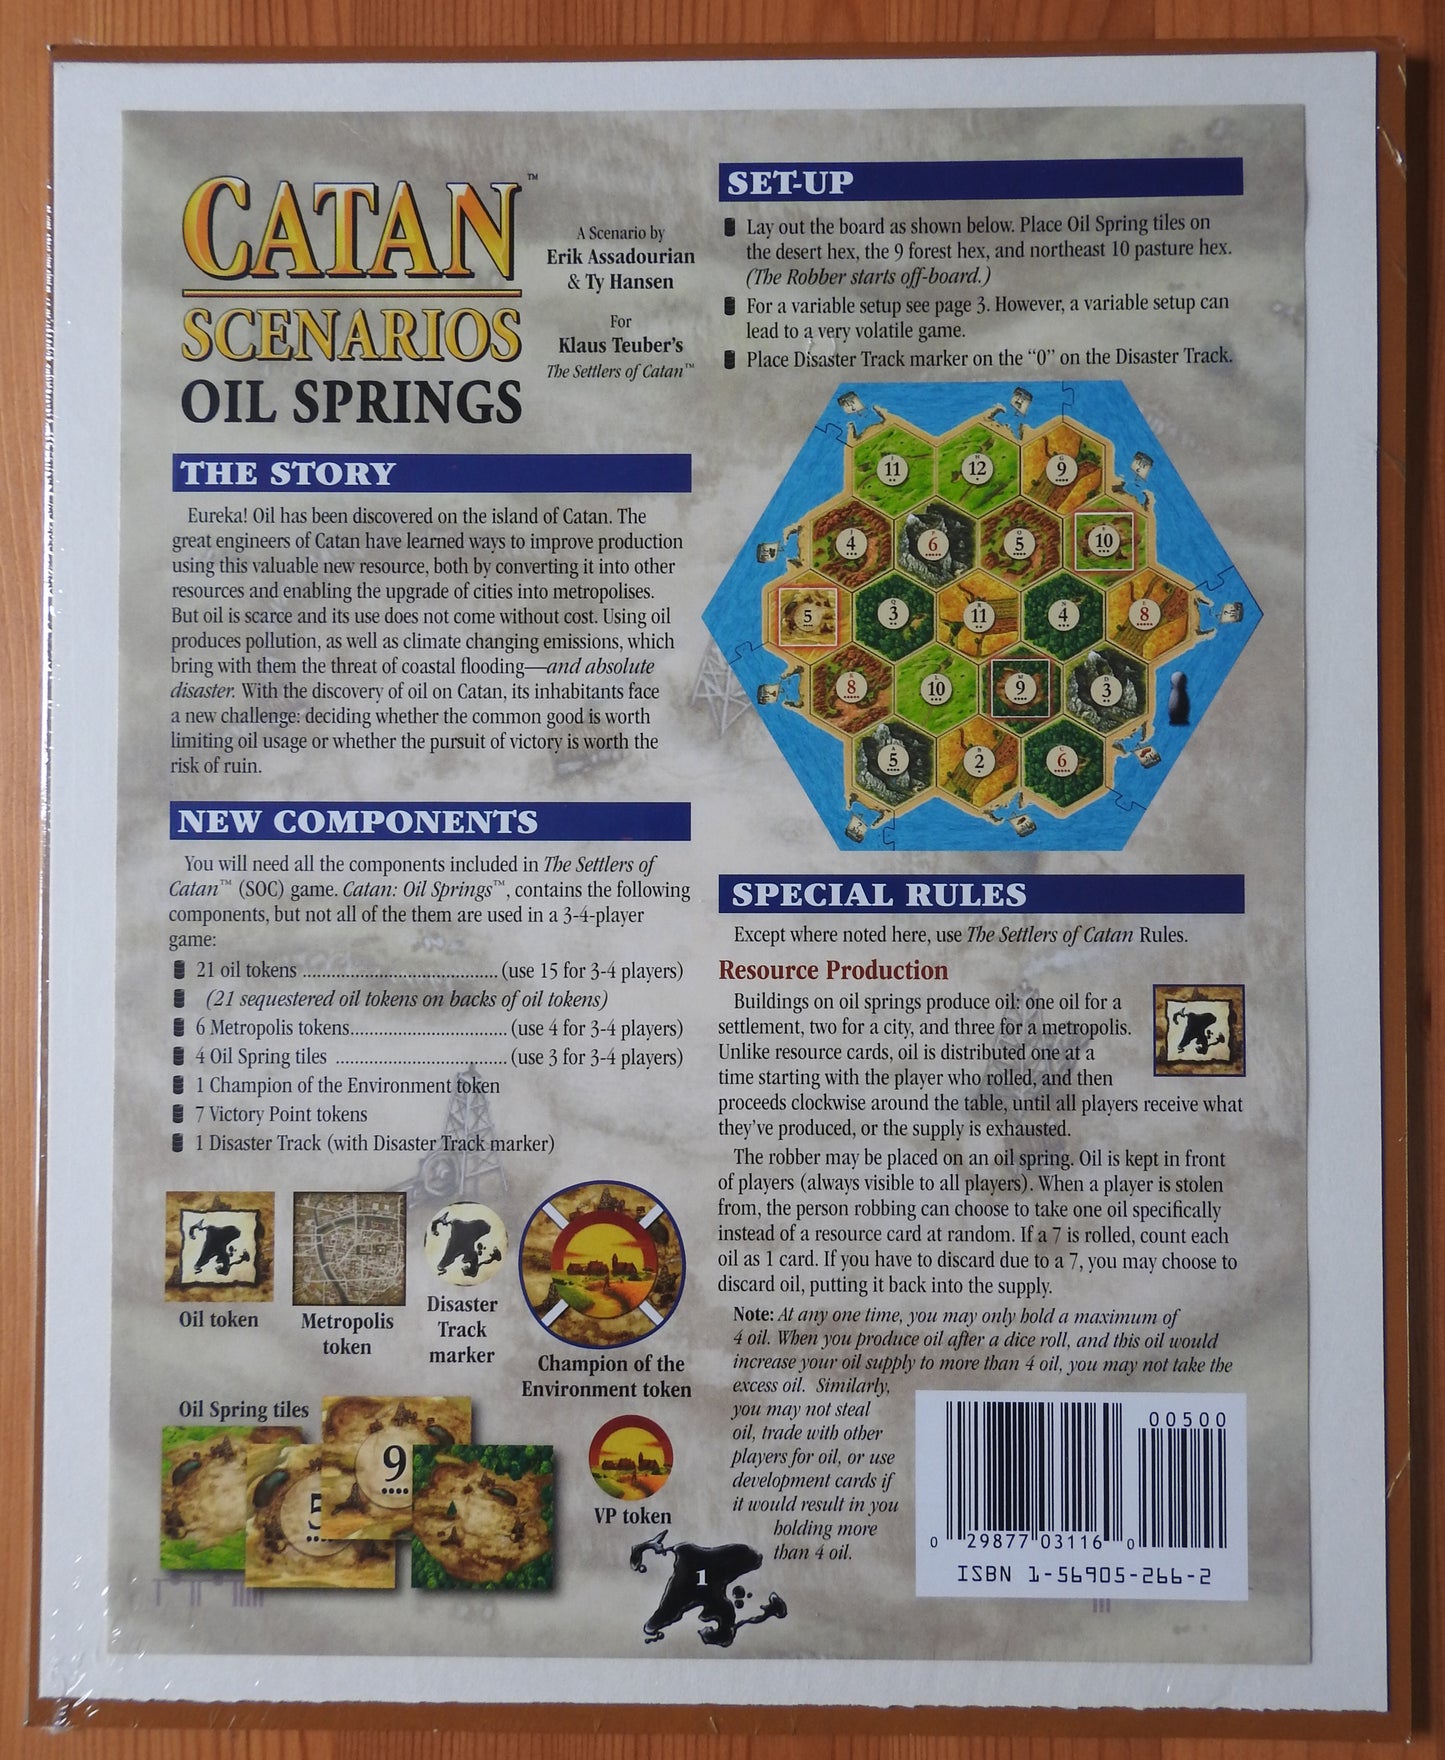 View of the back showing the instructions for this Catan Scenarios Oil Springs mini expansion.